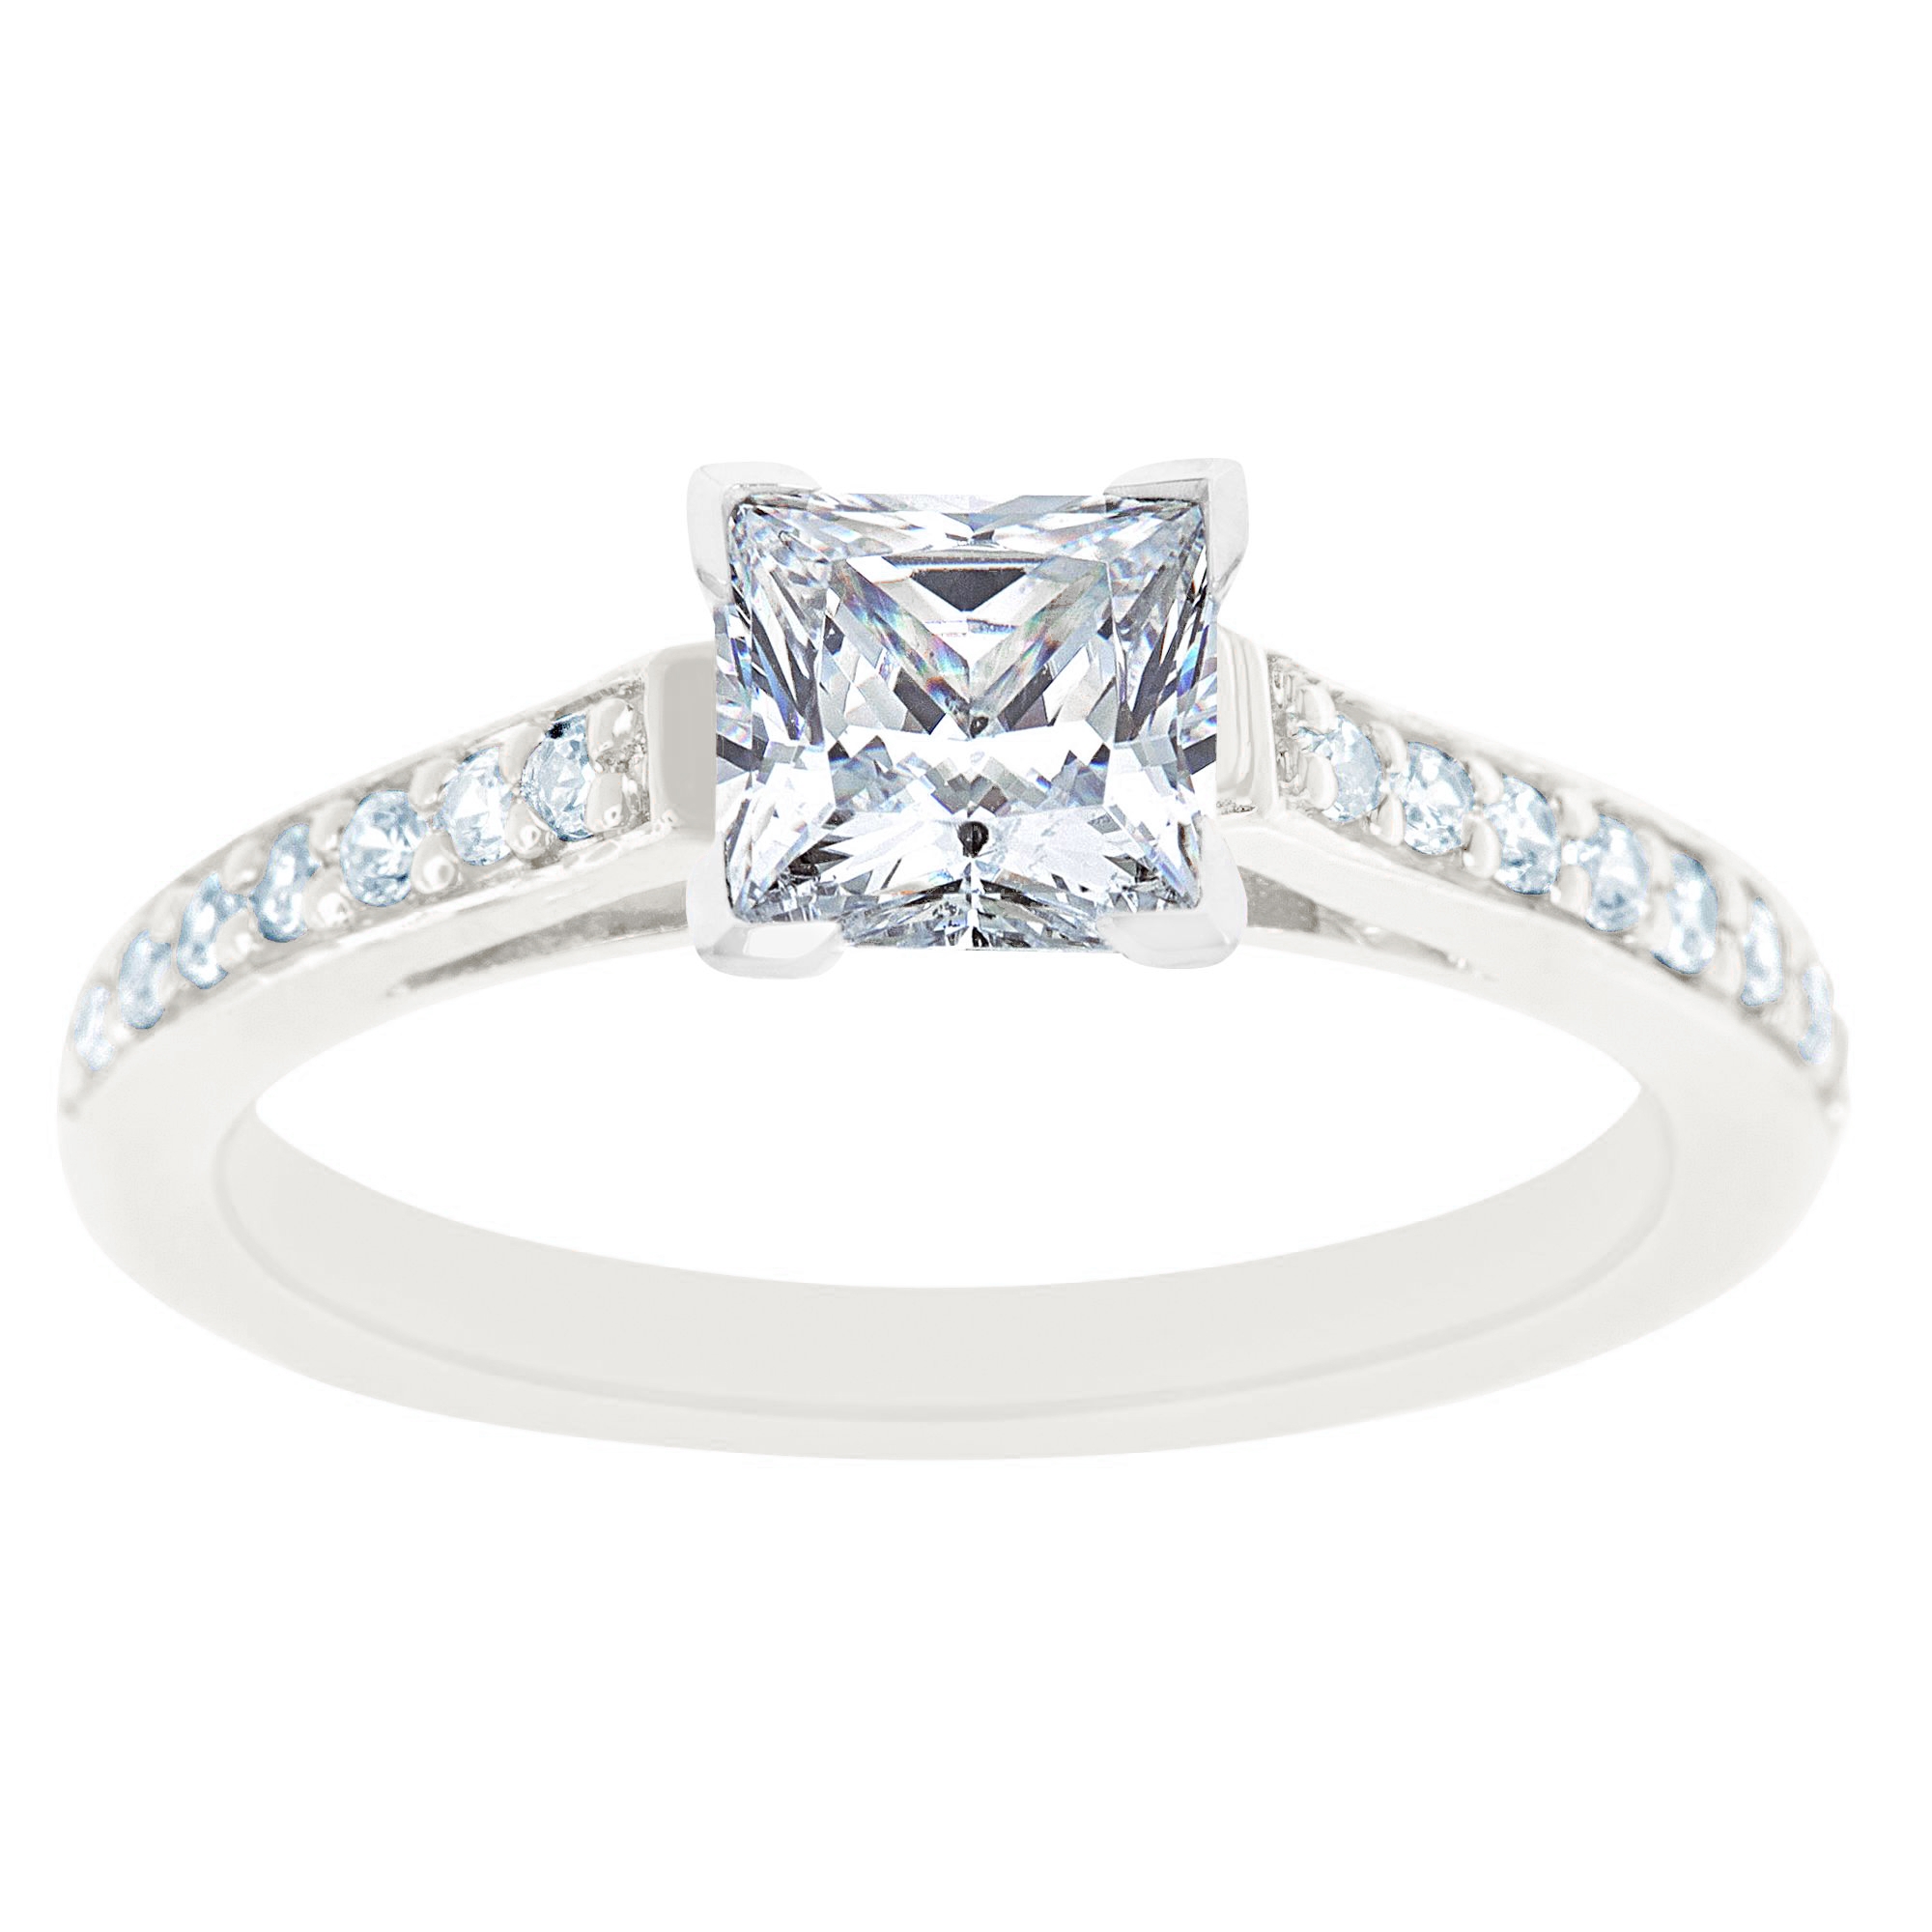 New York City Diamond District 14K White Gold Cathedral Princess Cut Certified Diamond Engagement Ring